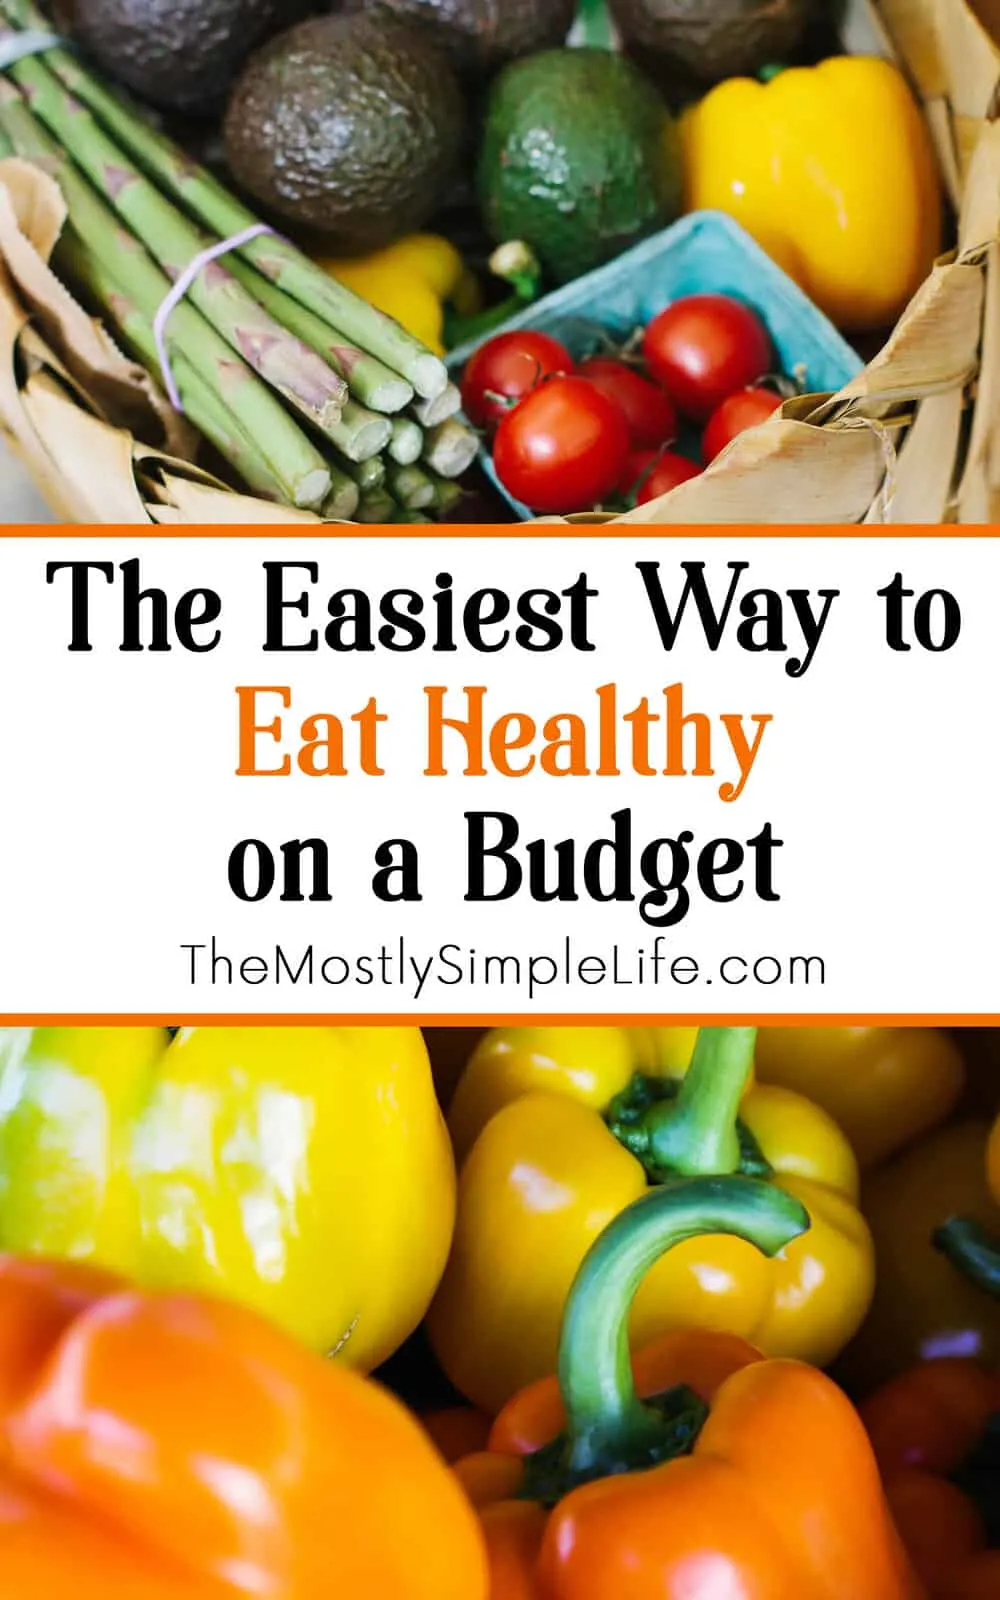 The Easiest Way to Eat Healthy on a Budget